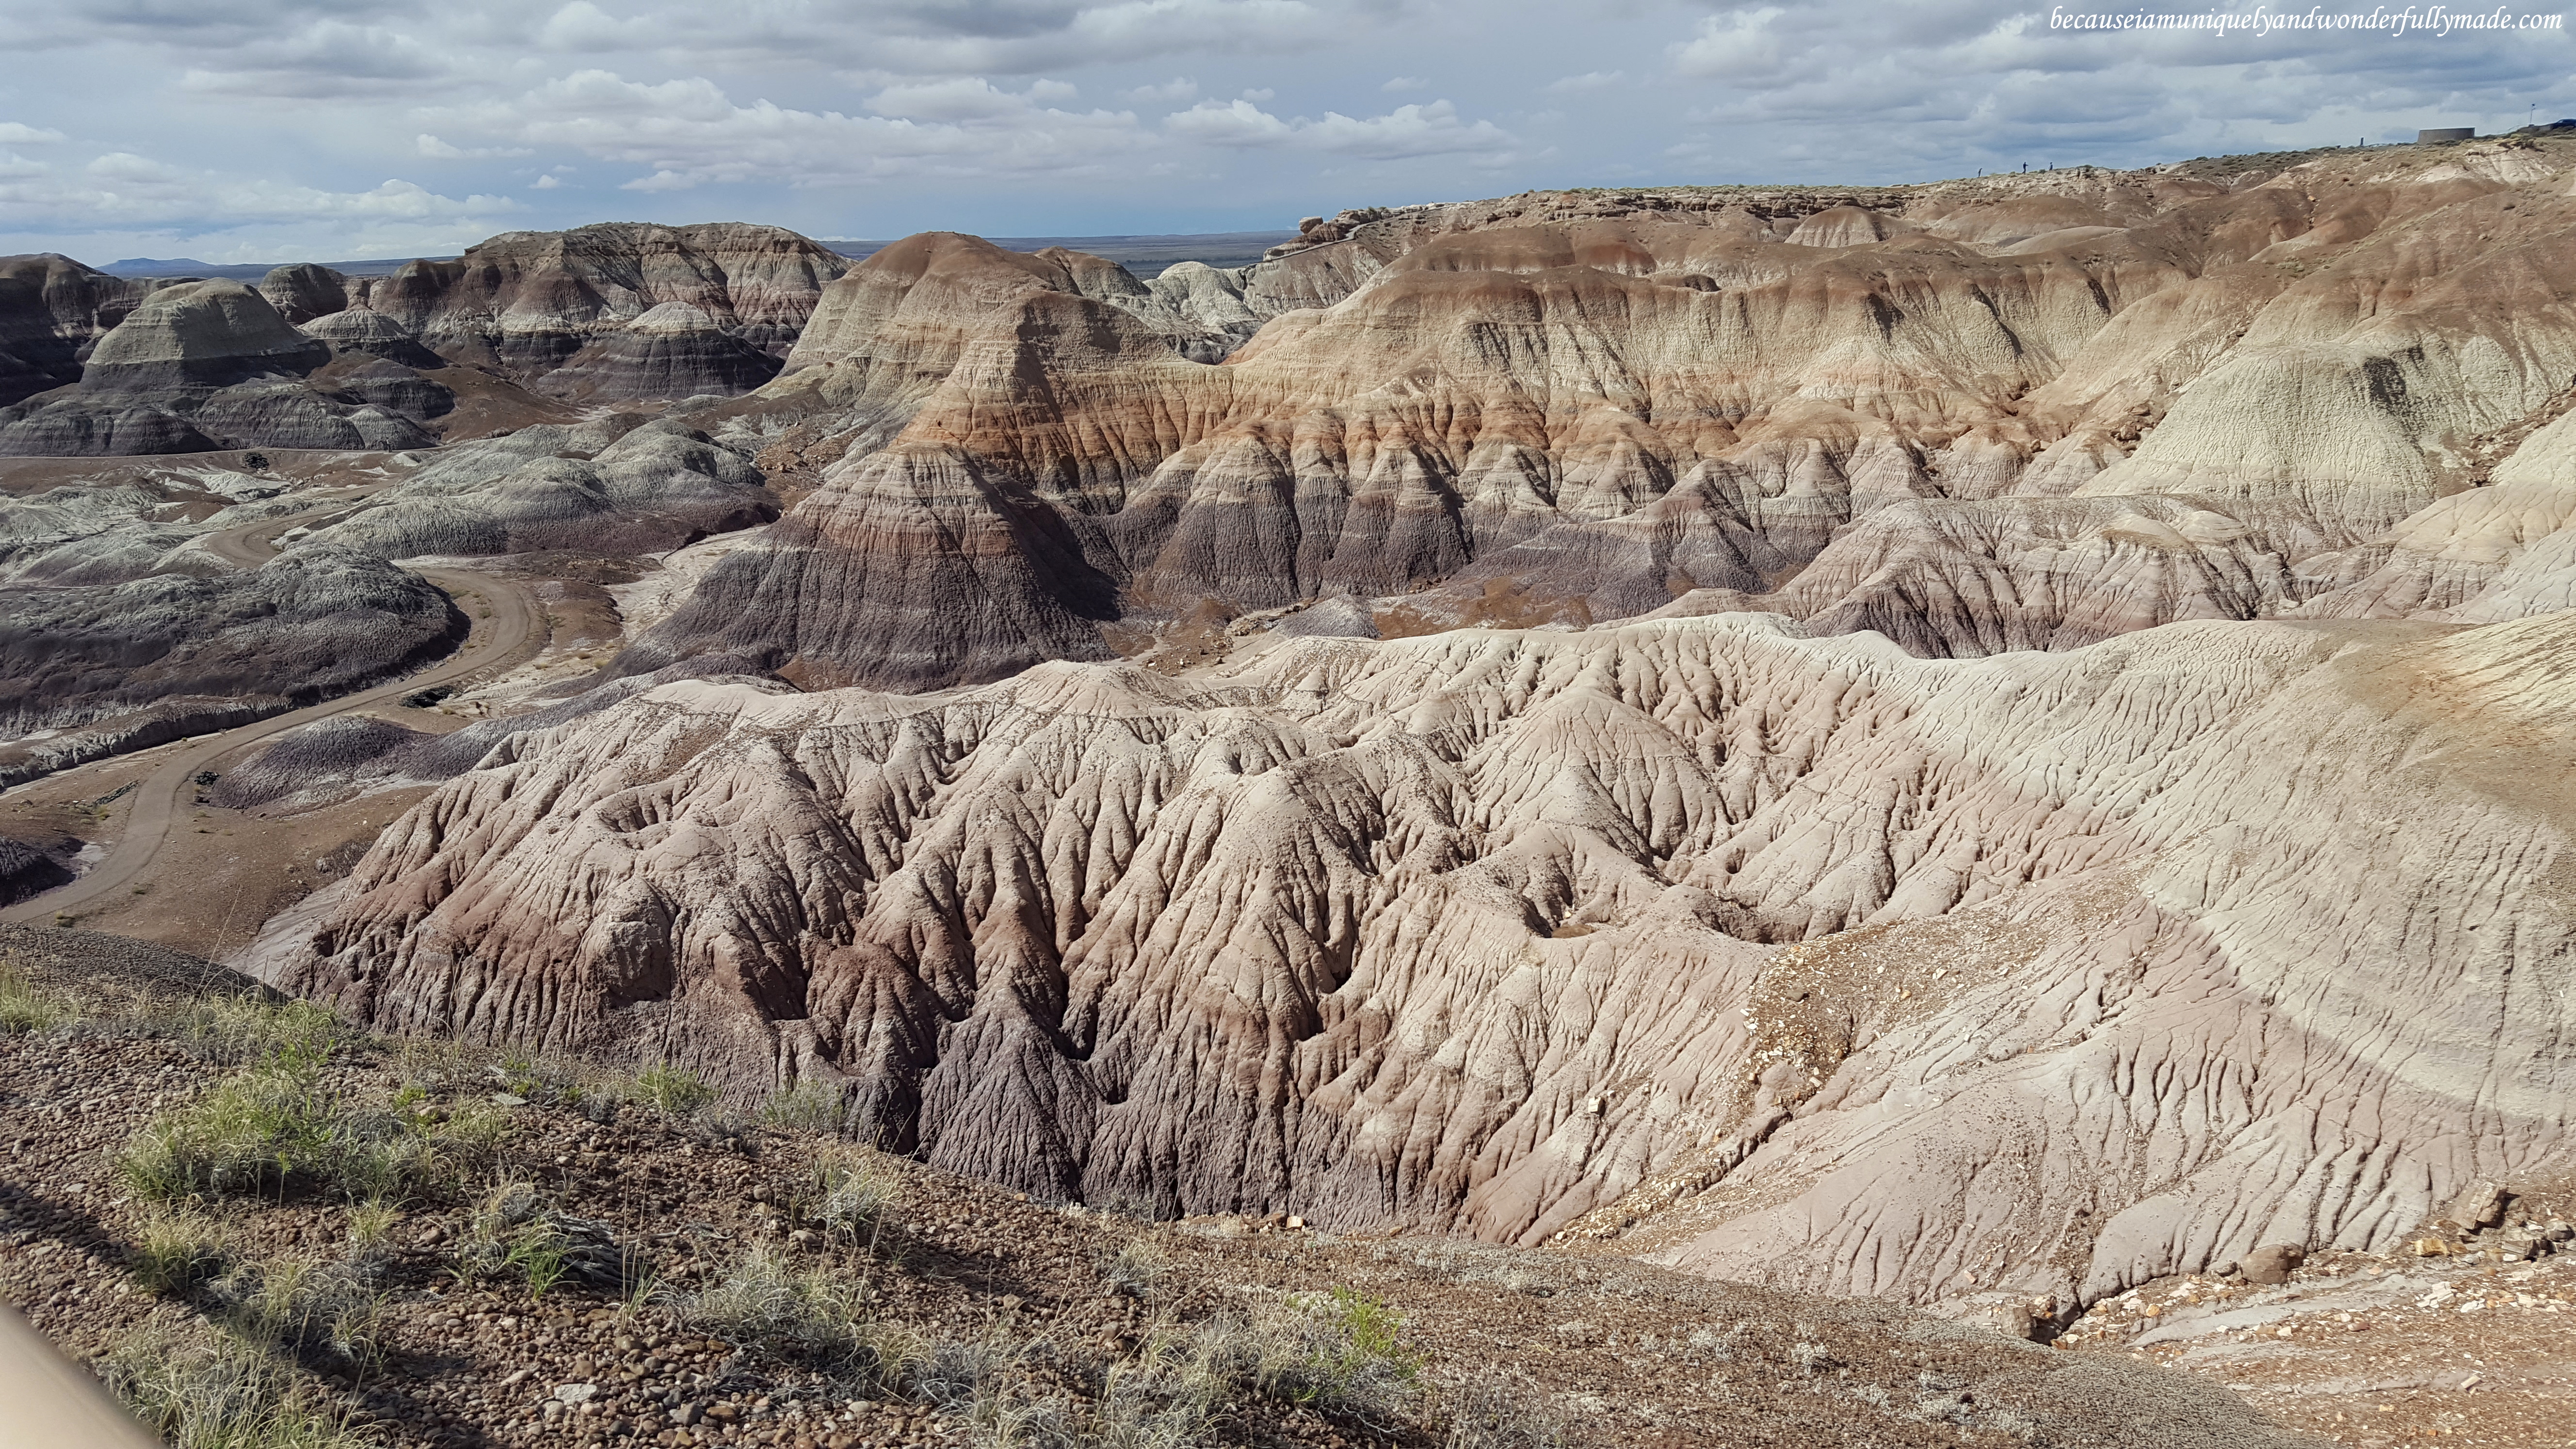 The gorgeous badlands of Petrified Forest National Park.